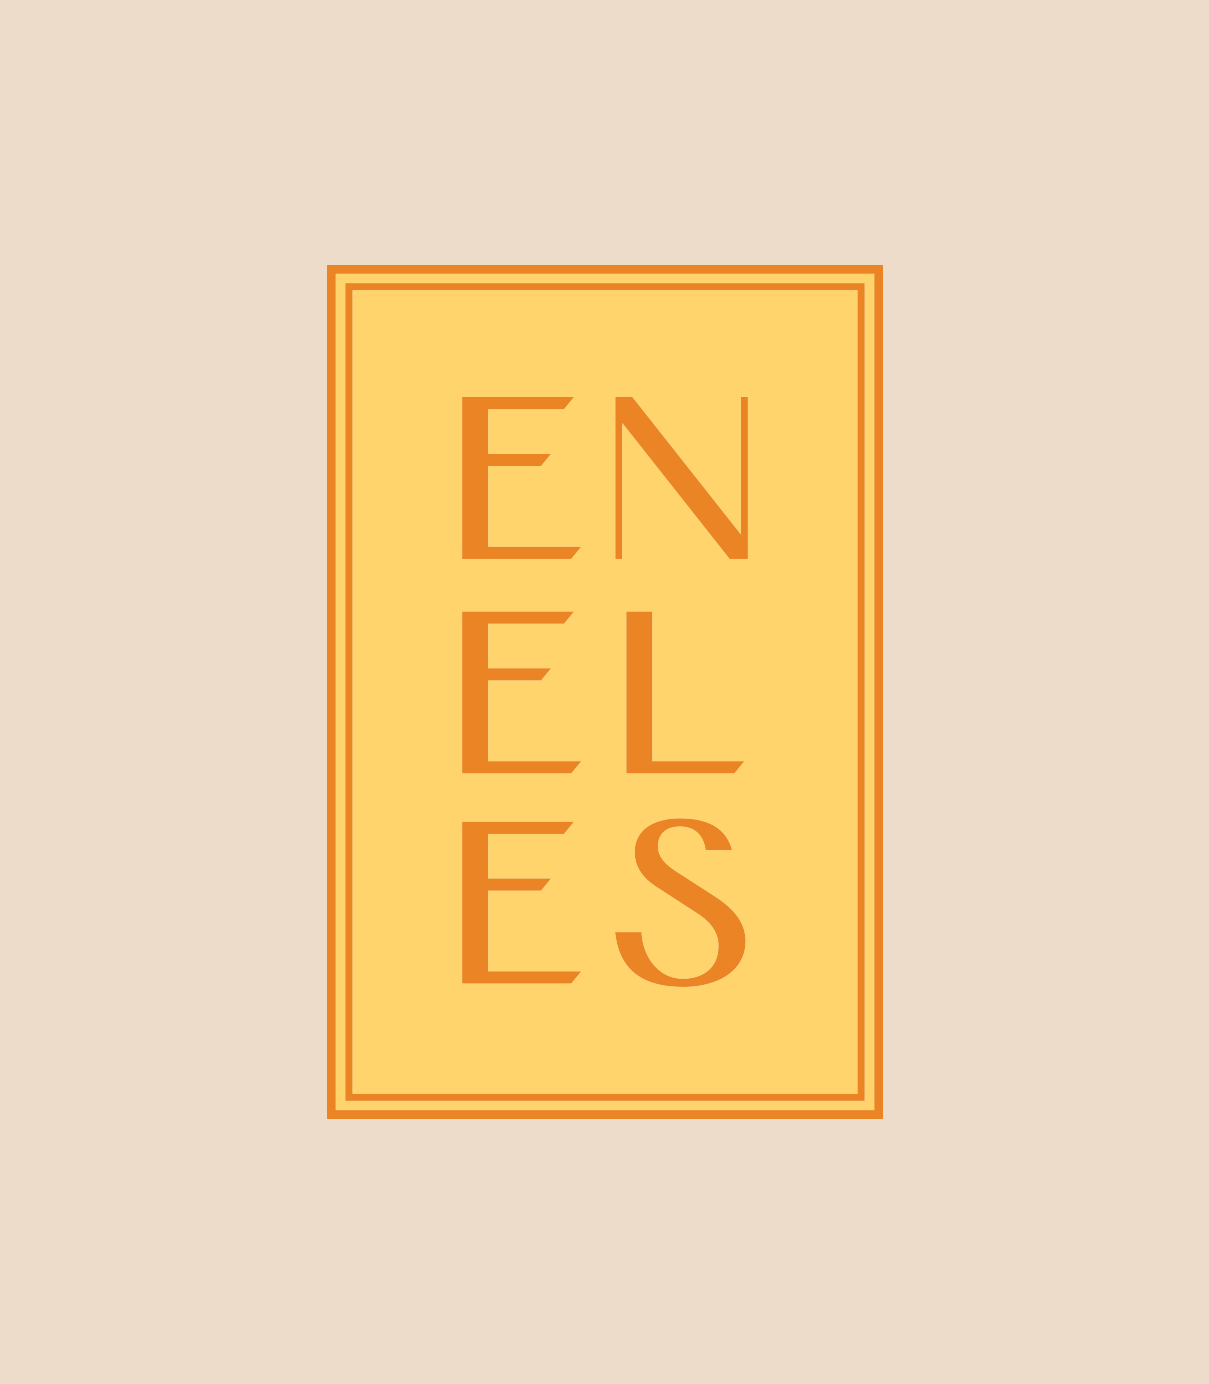 Eneles rectangle badge in yellow and orange on tan background